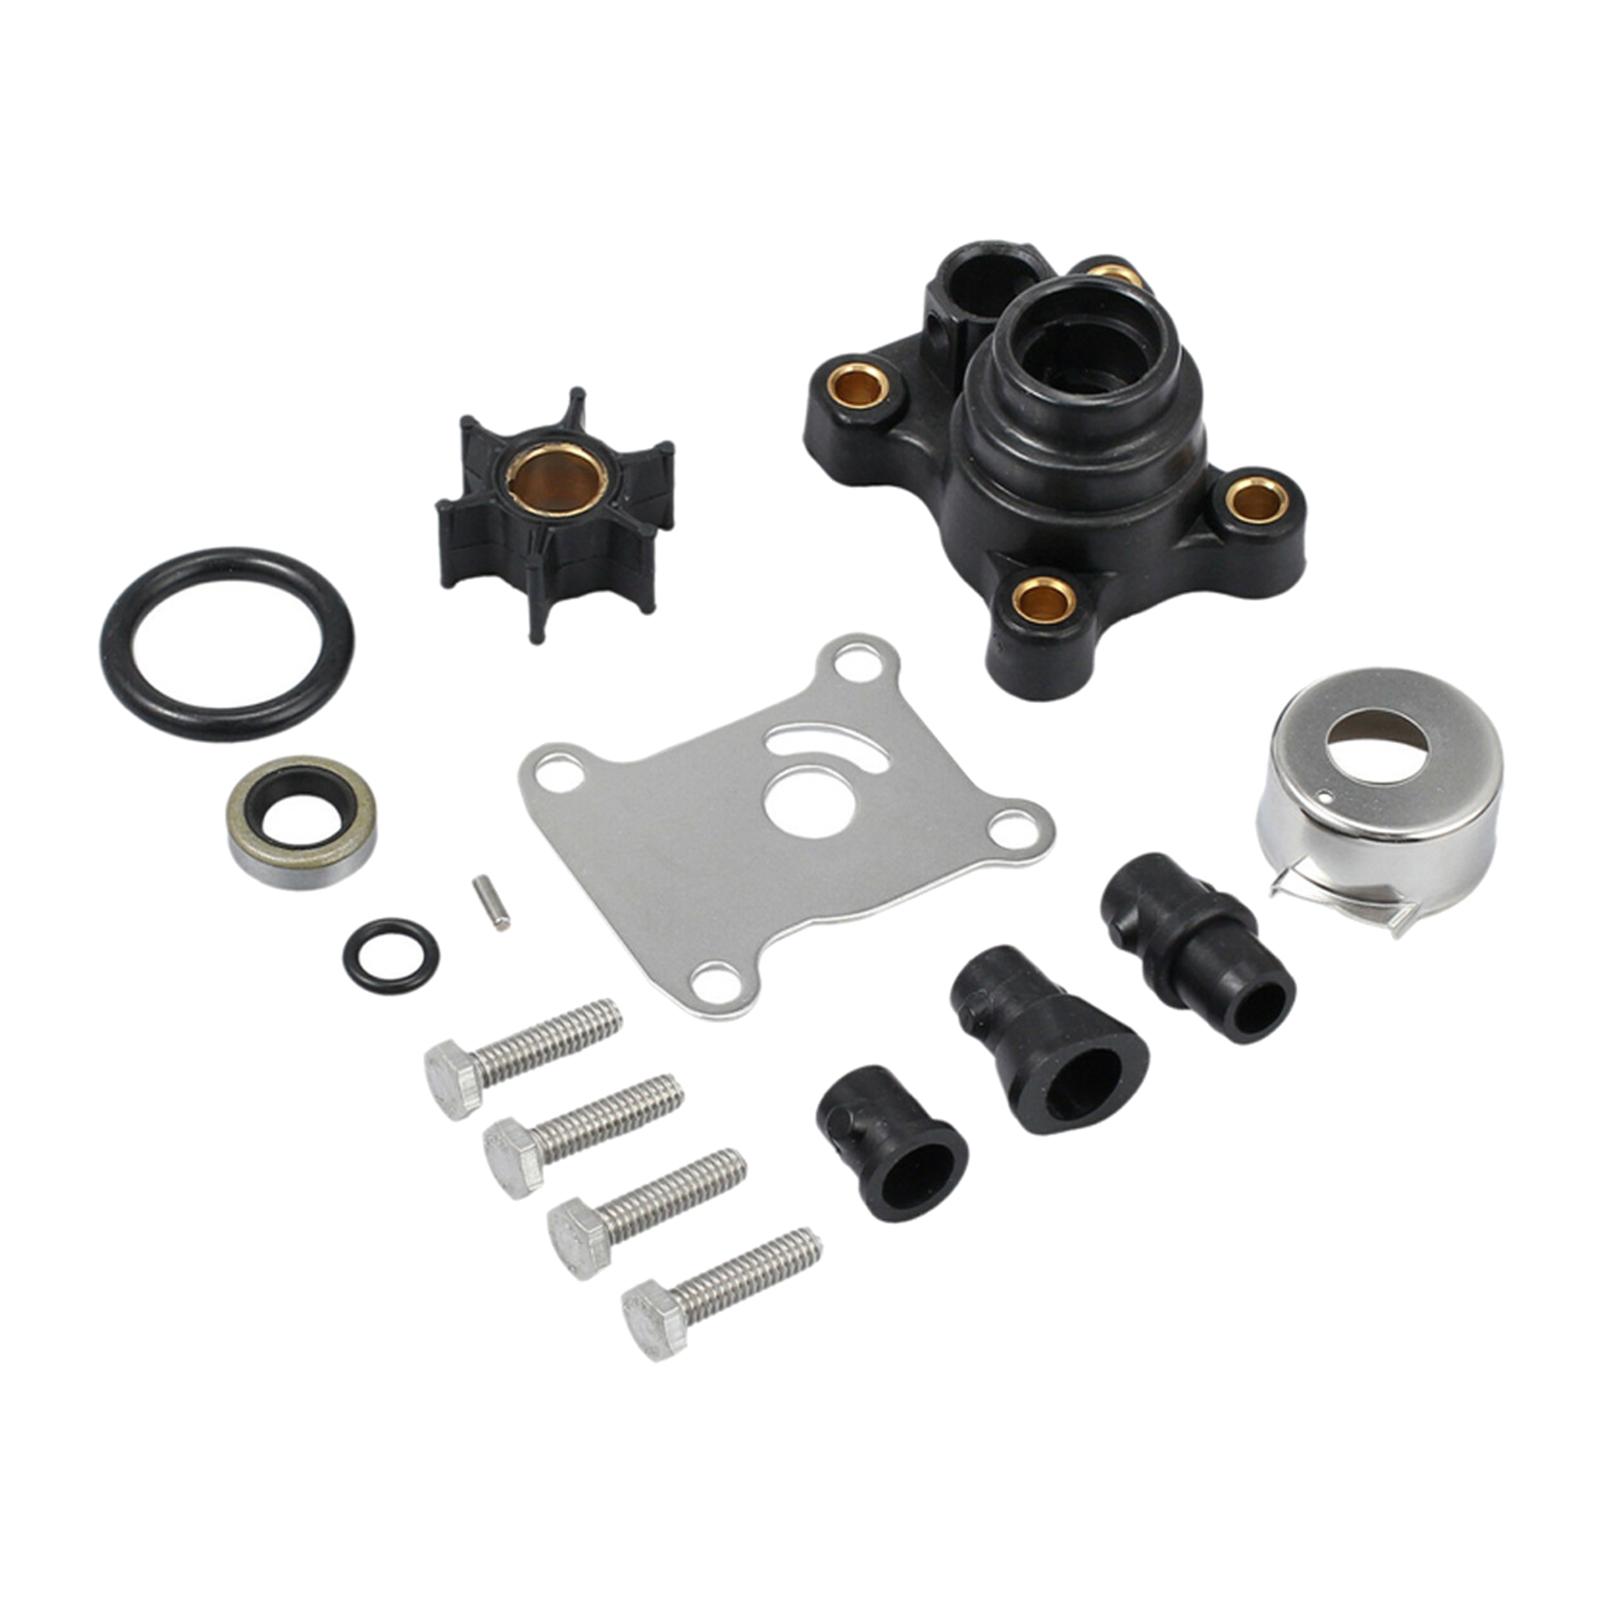 Water Pump Impeller Kit for Johnson Evinrude 2 & 4 STROKE 9.9 15 HP Replace